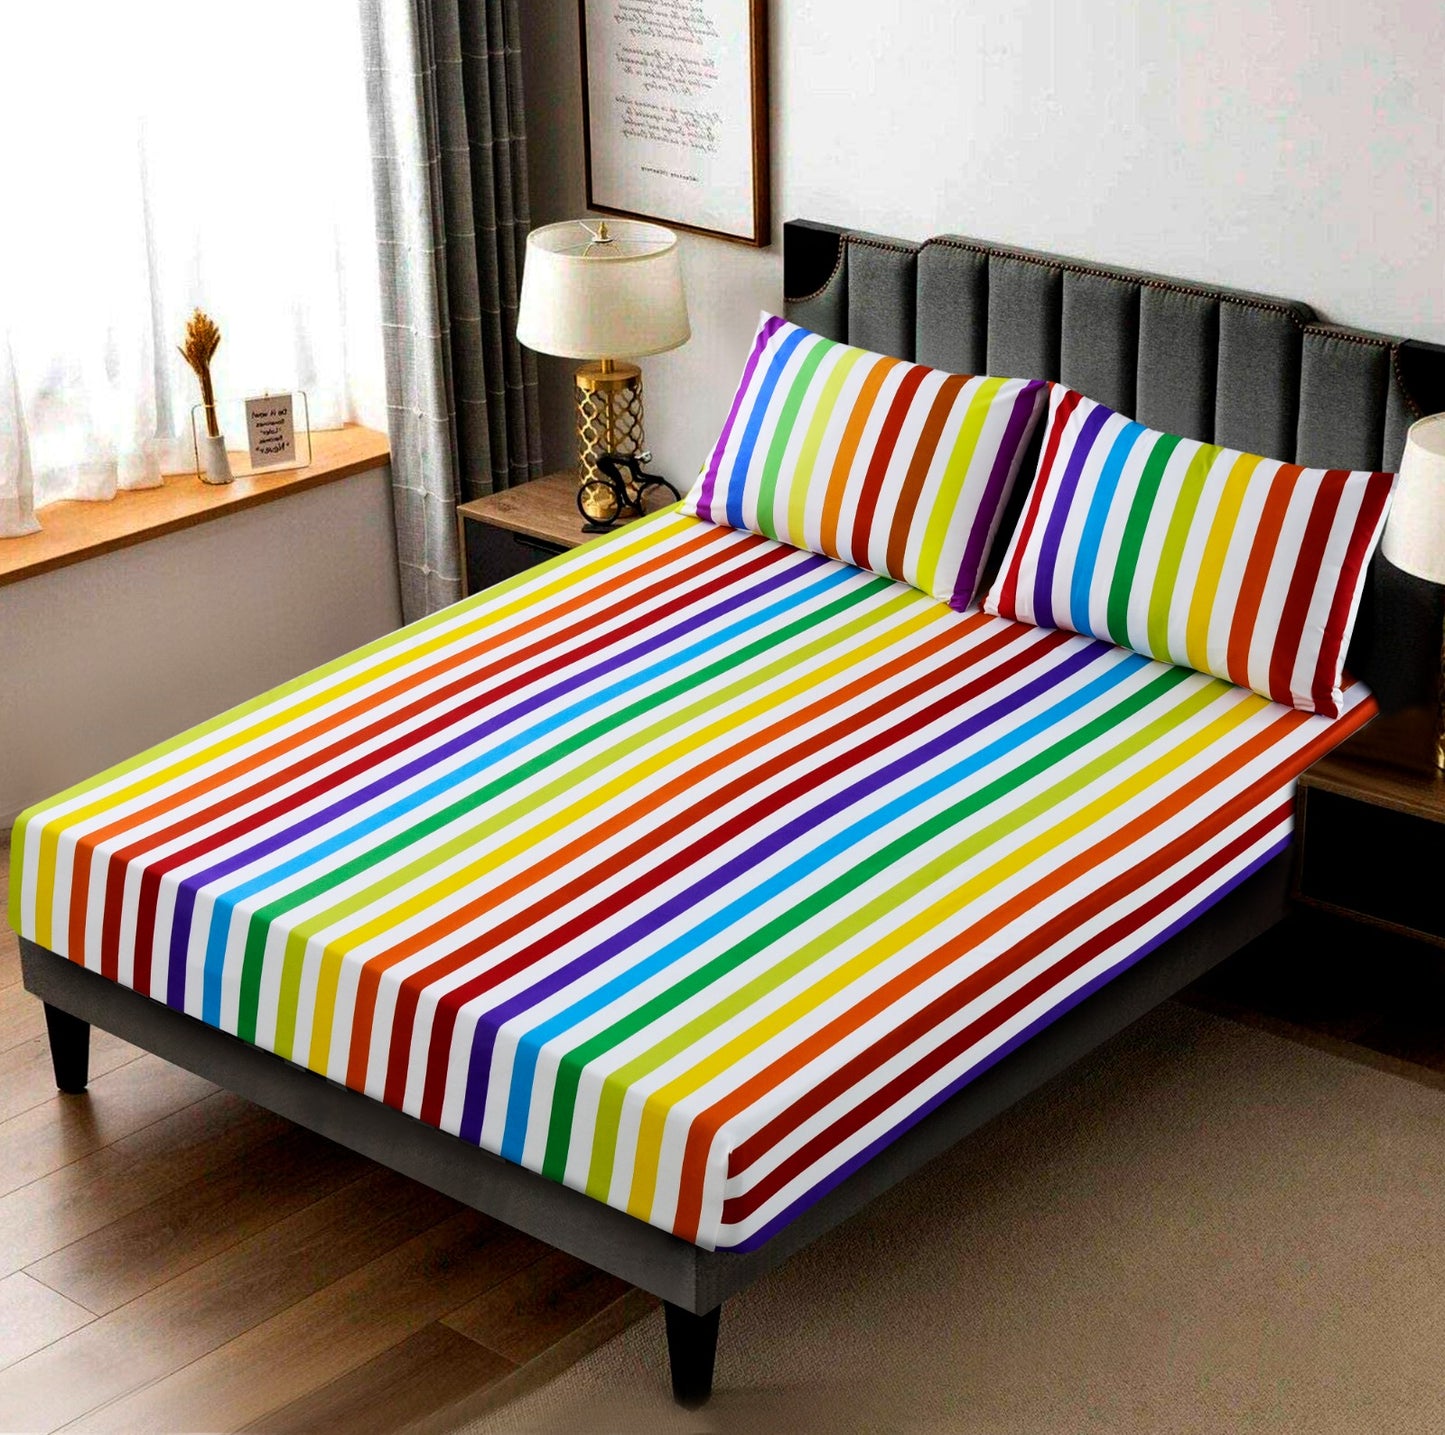 Fitted Bed Sheet-Multi Stripes Apricot